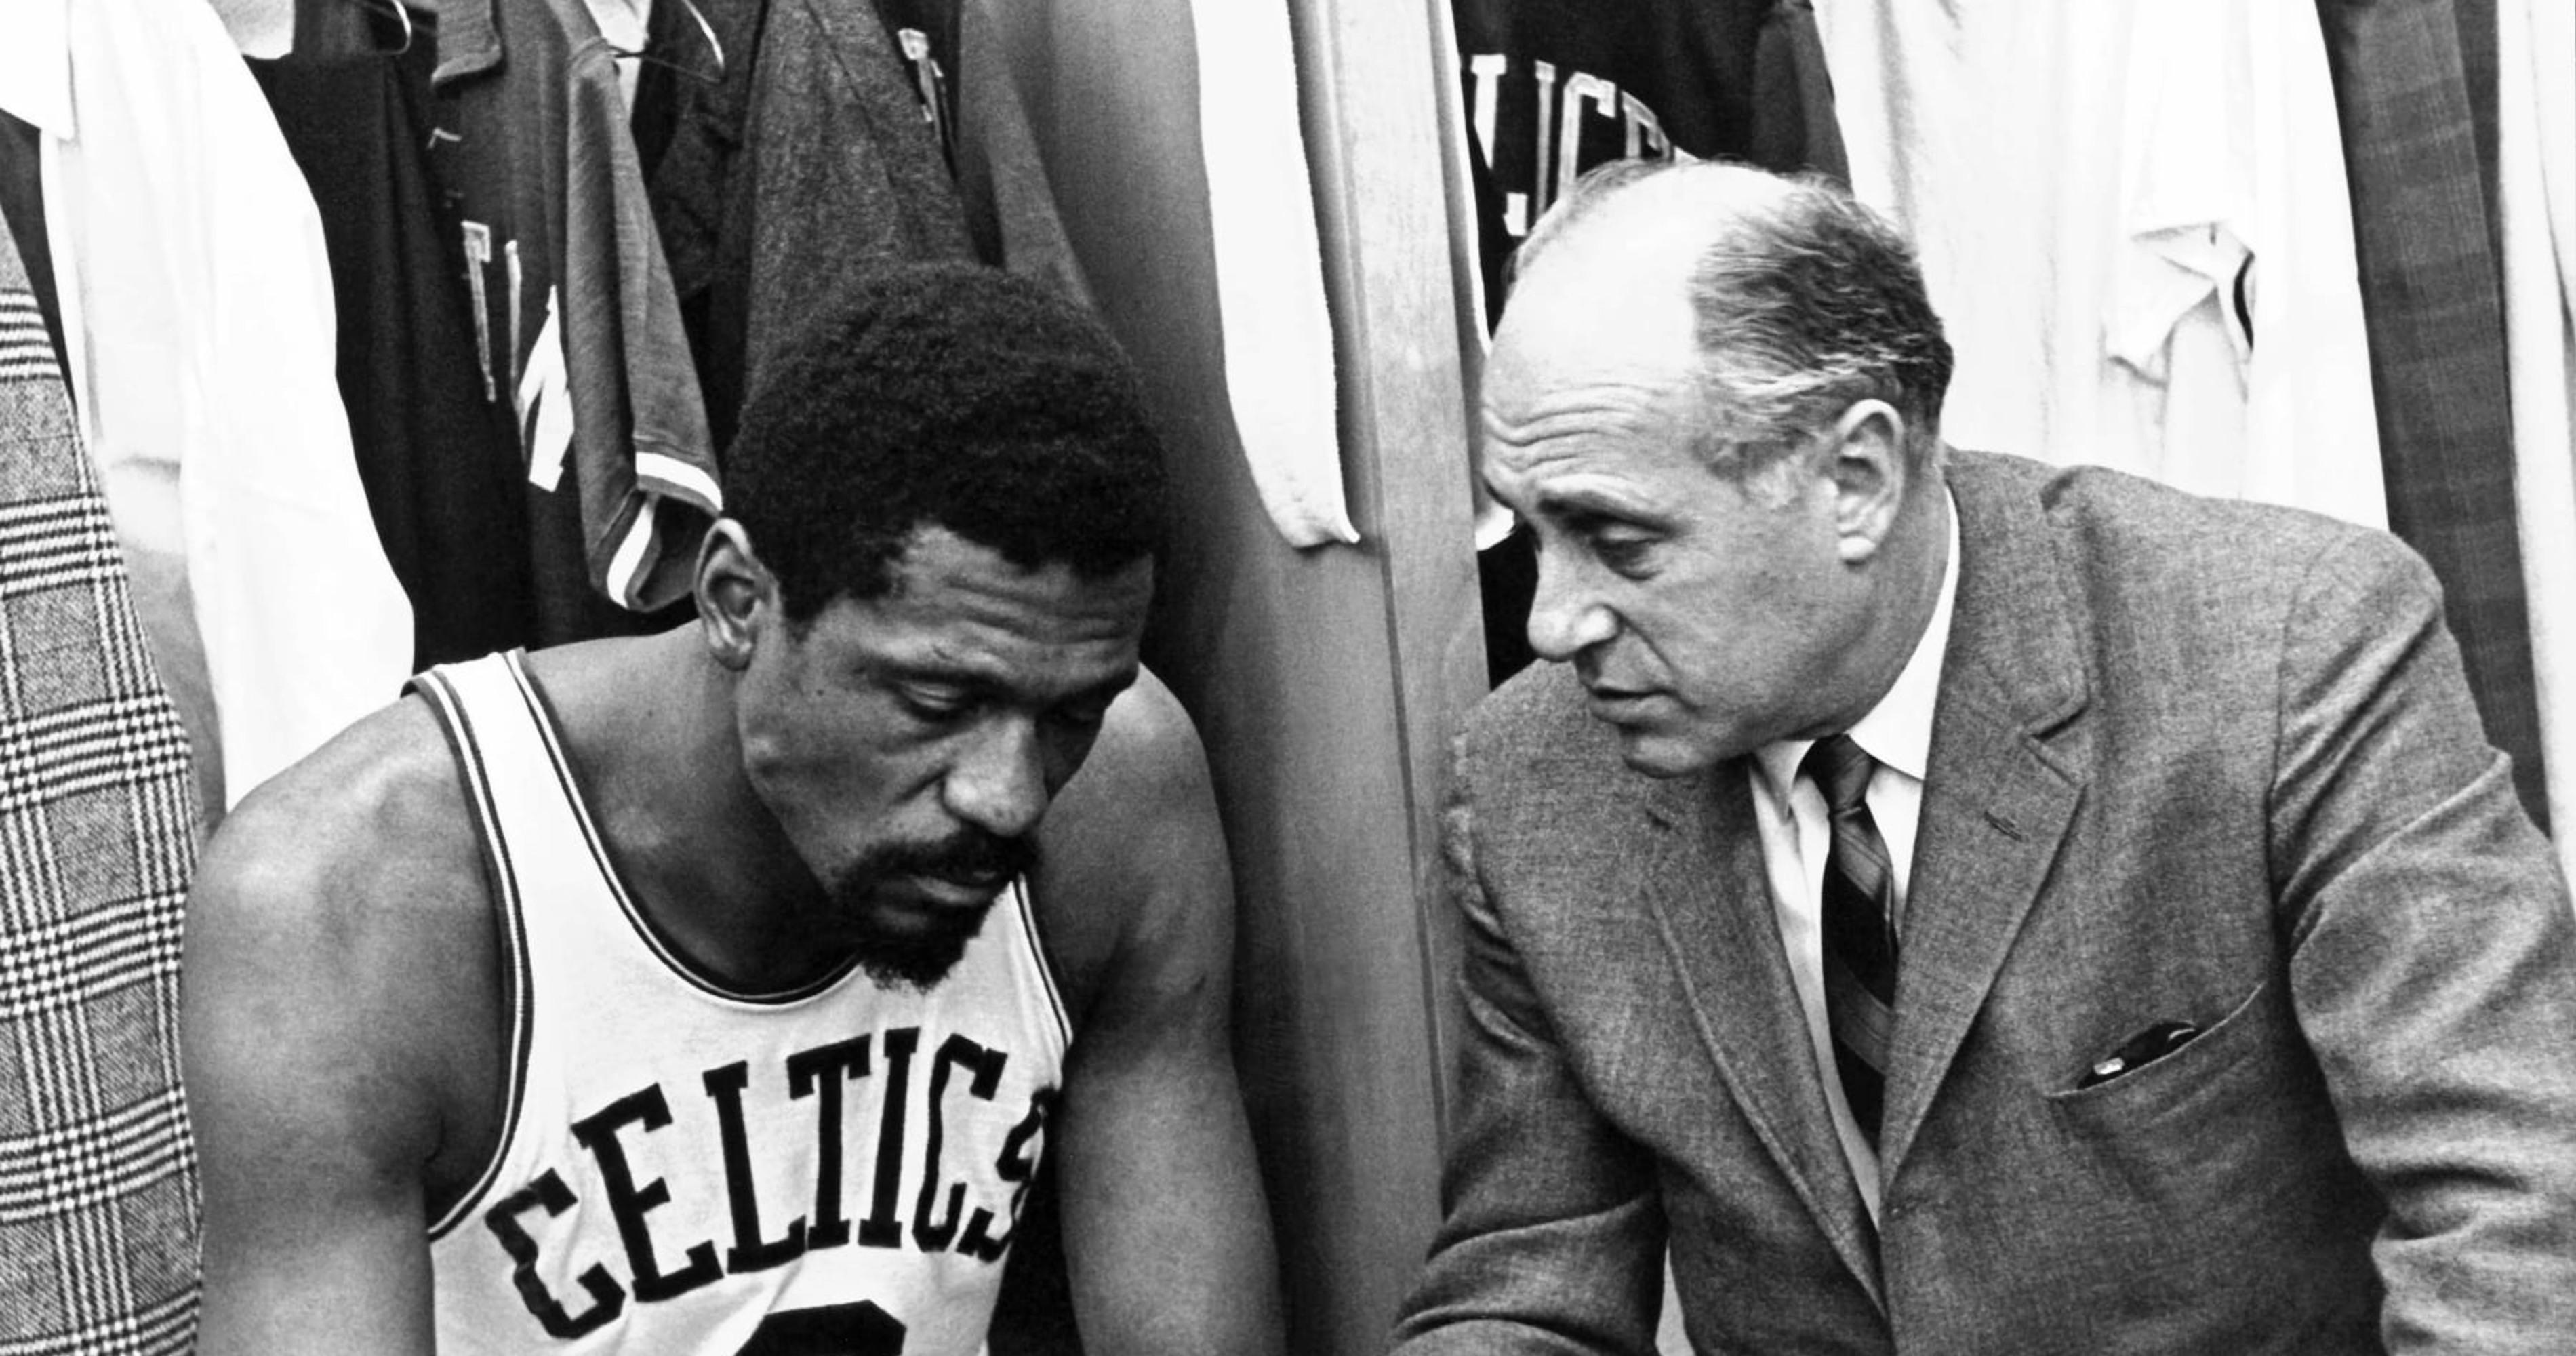 Why was Boston Garden nearly empty when Bill Russell's number was